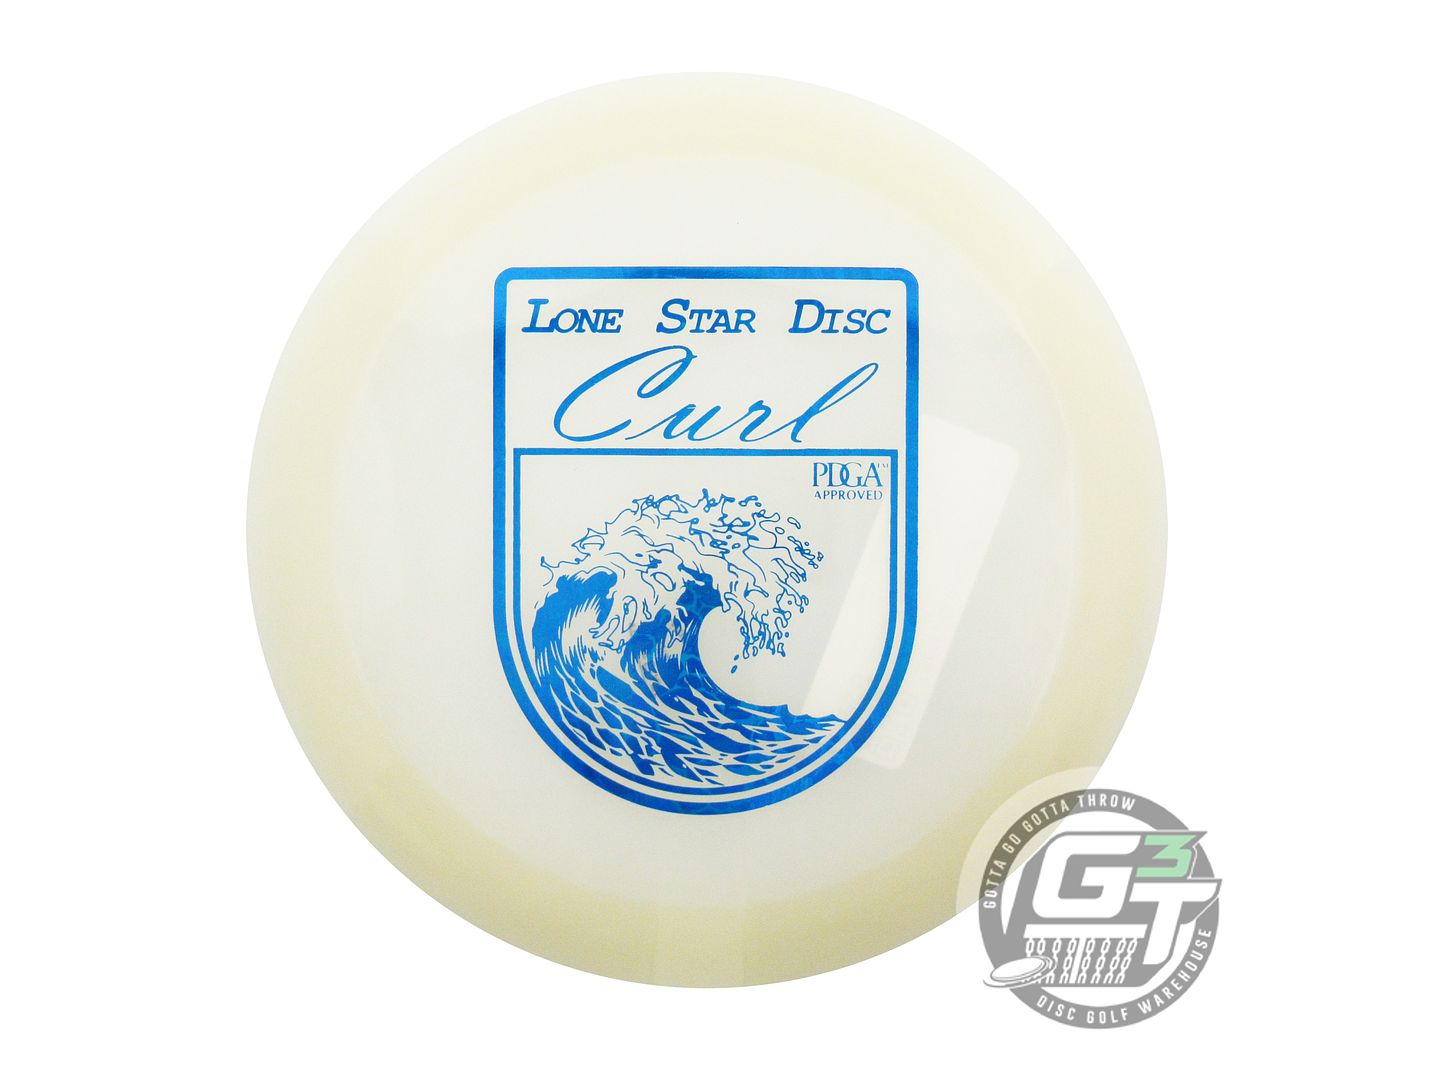 Lone Star Artist Series Glow Curl Distance Driver Golf Disc (Individually Listed)